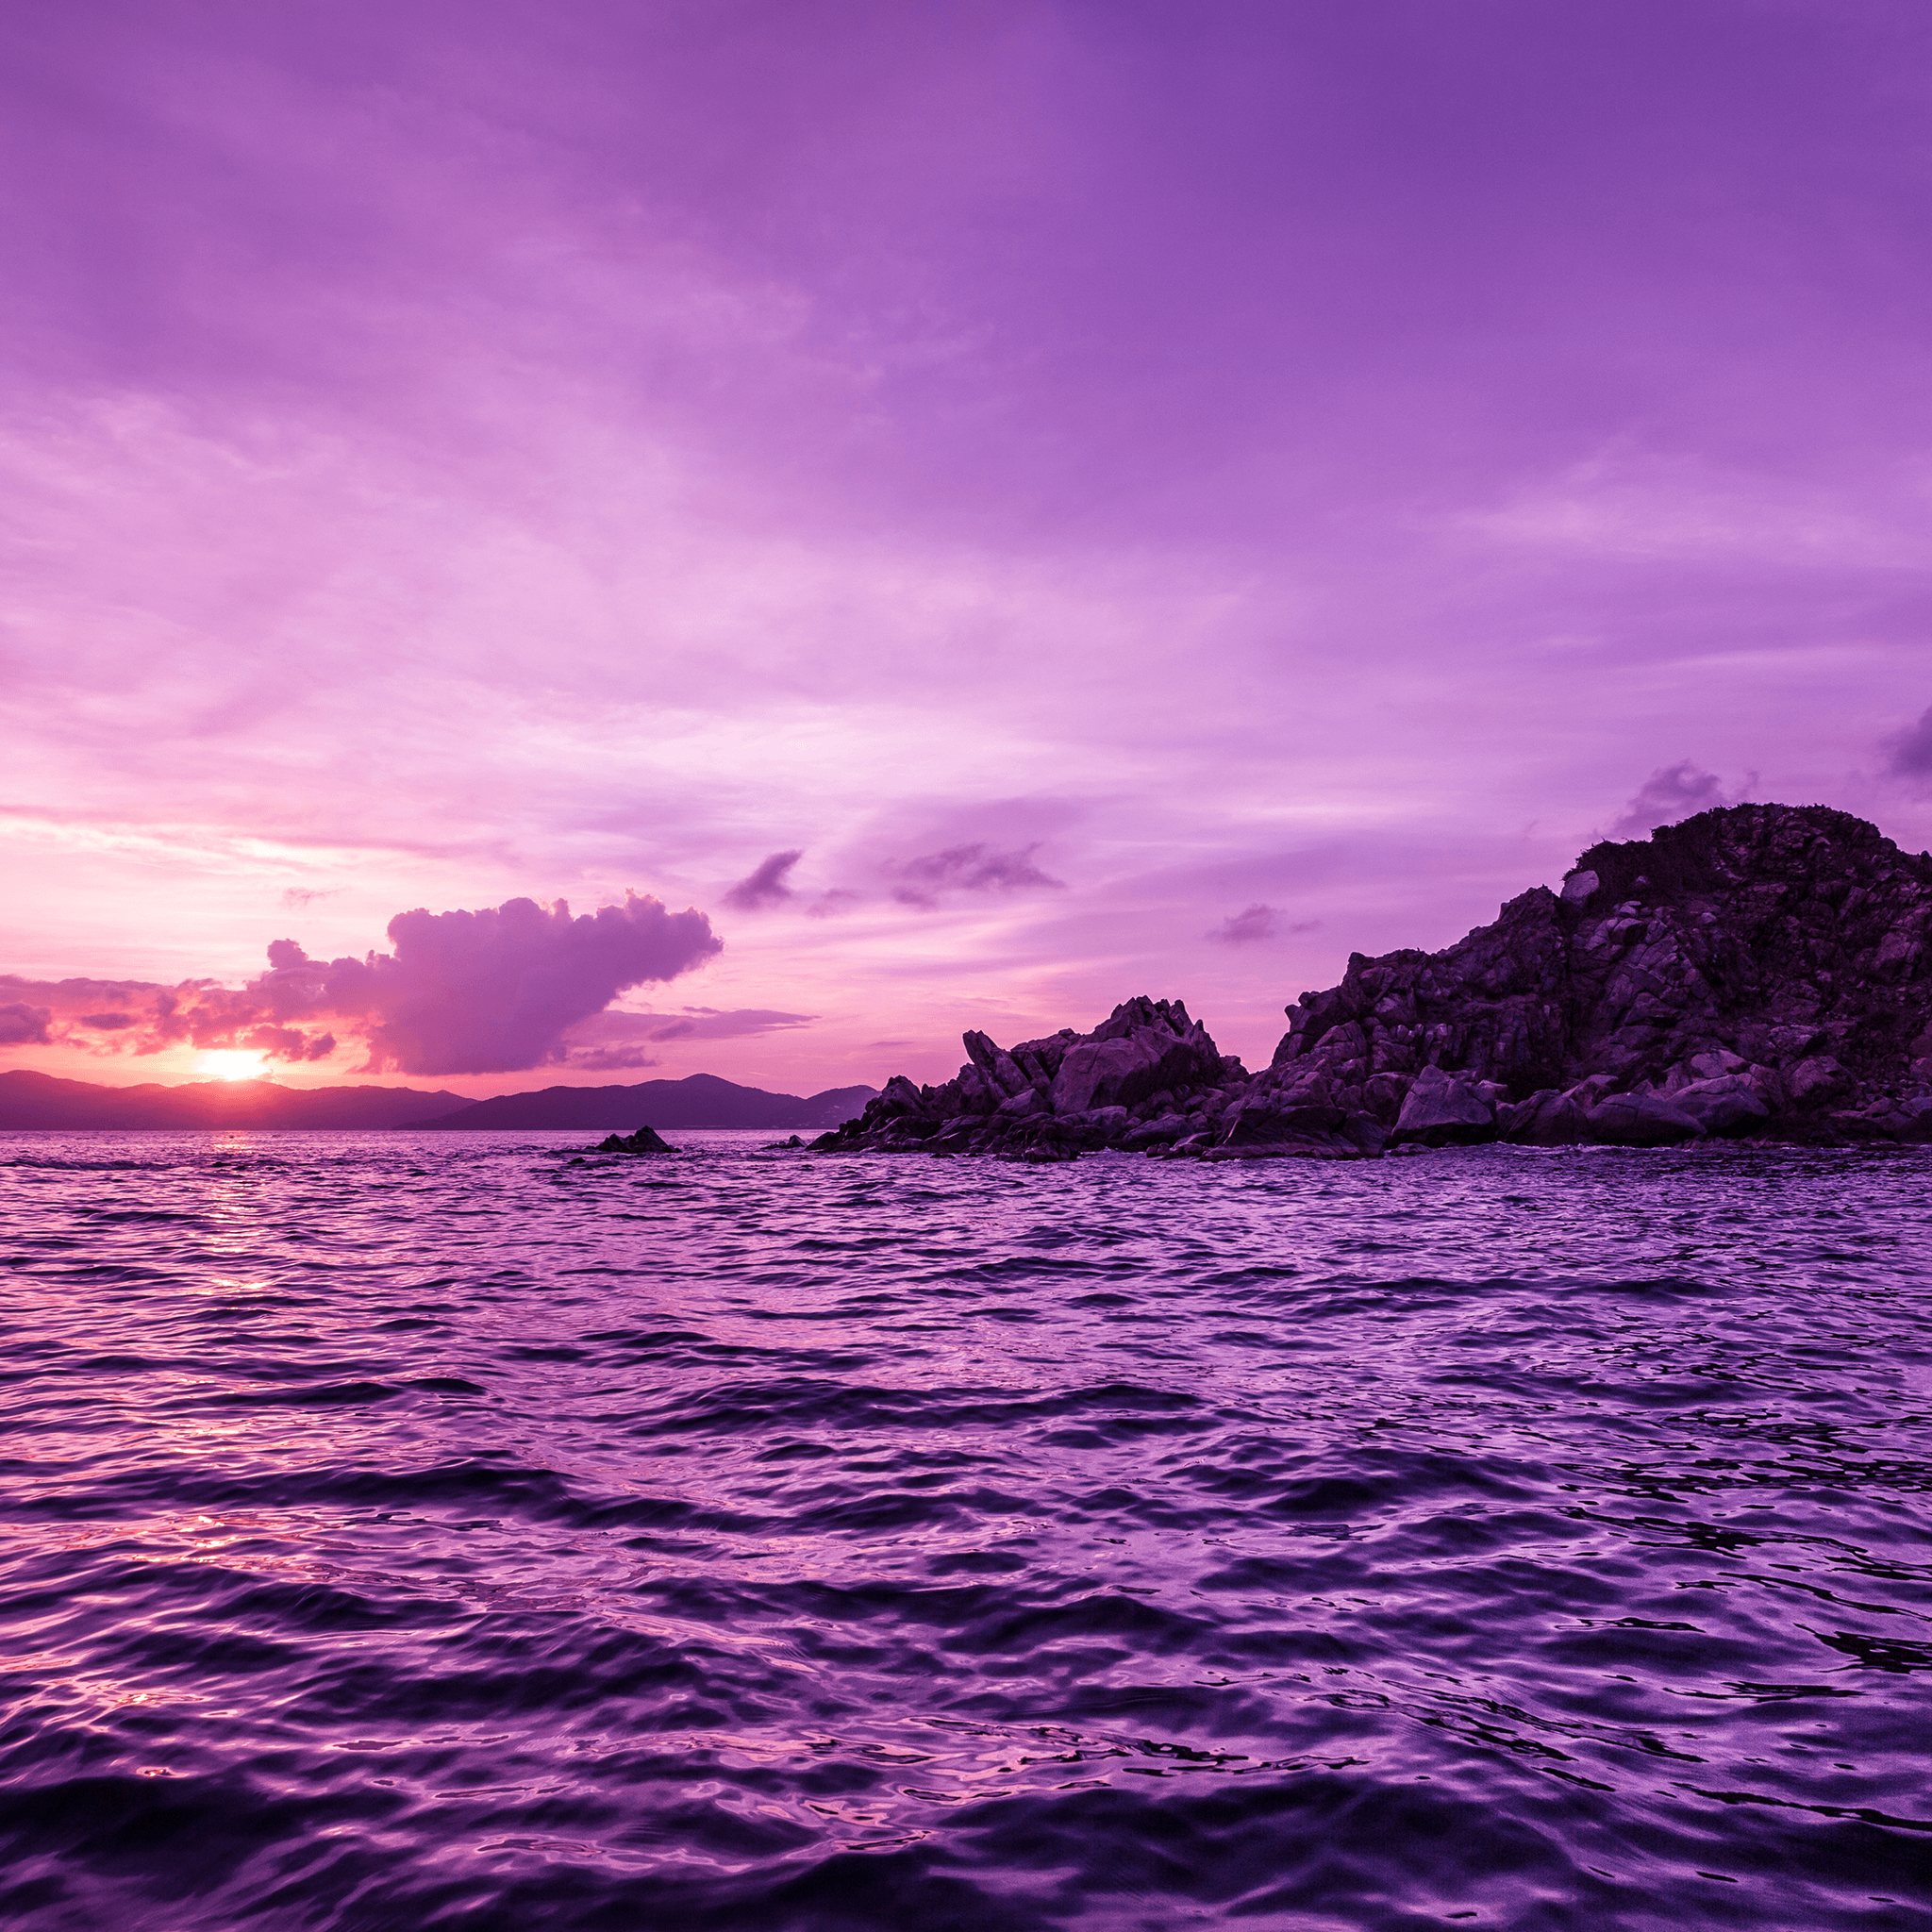 Beautiful Wallpapers For Ipad Air - Island In The Water At Sunset - HD Wallpaper 